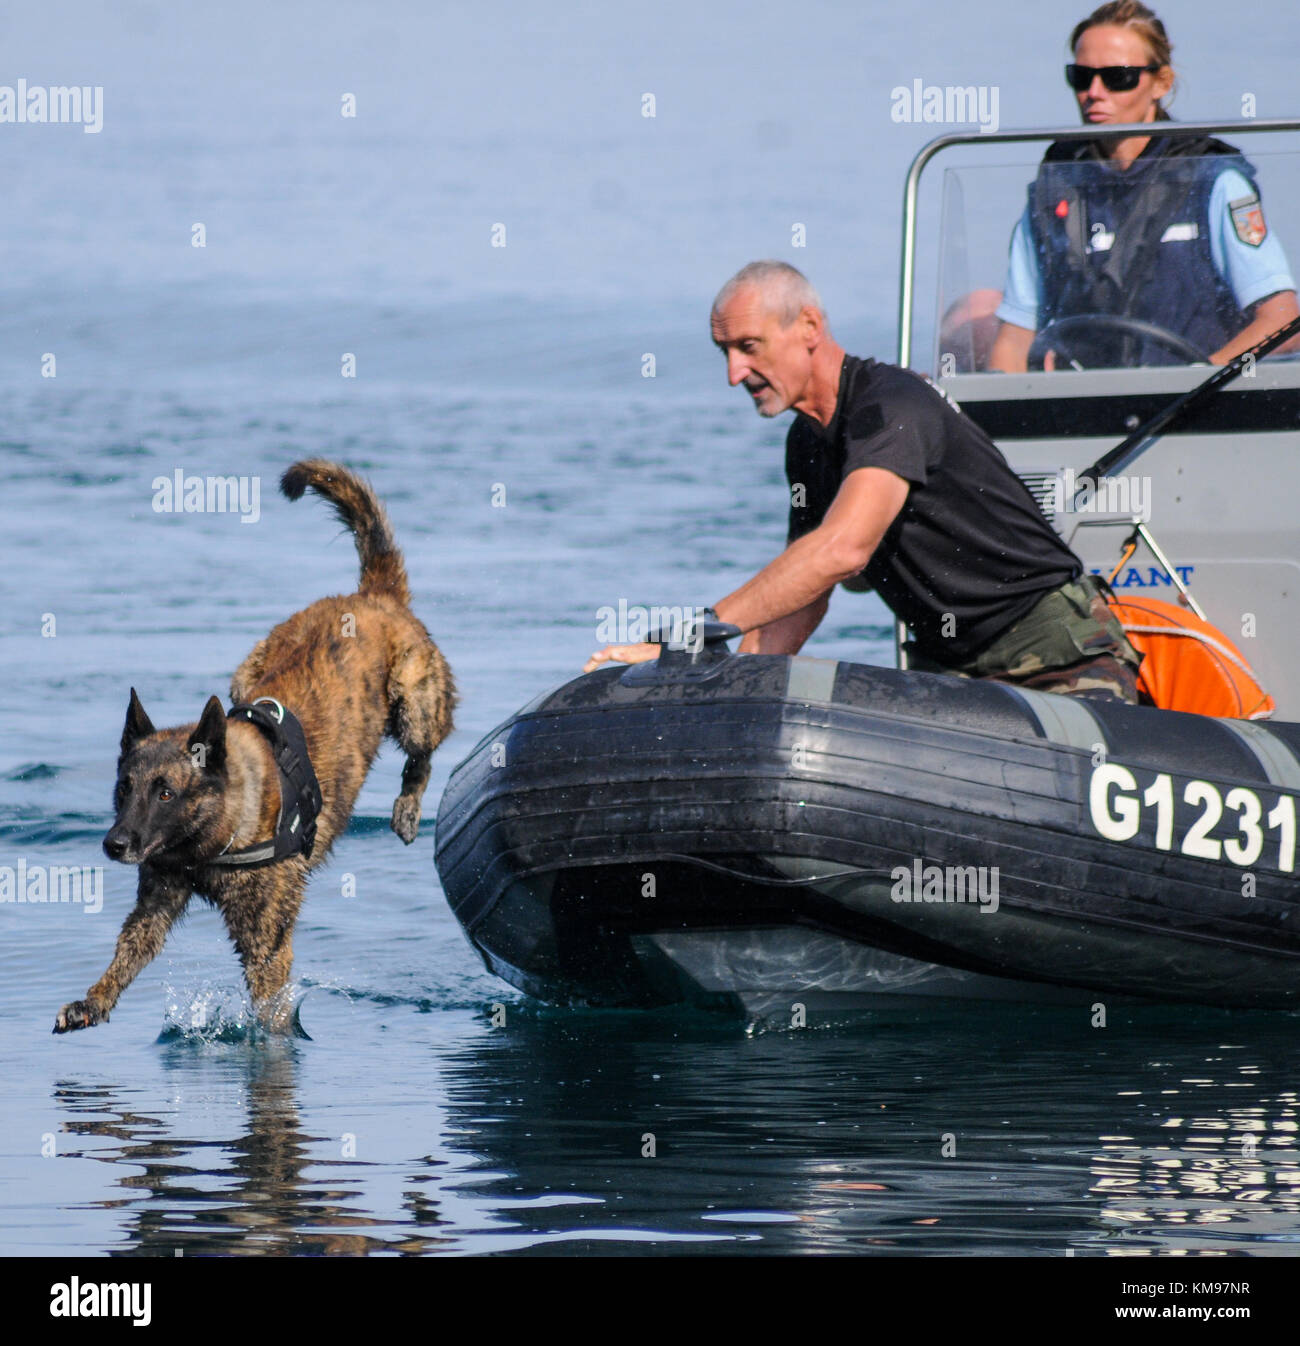 French and swiss gendarmes take part in a lifesize drill at Leman lake, Savoie, France Stock Photo